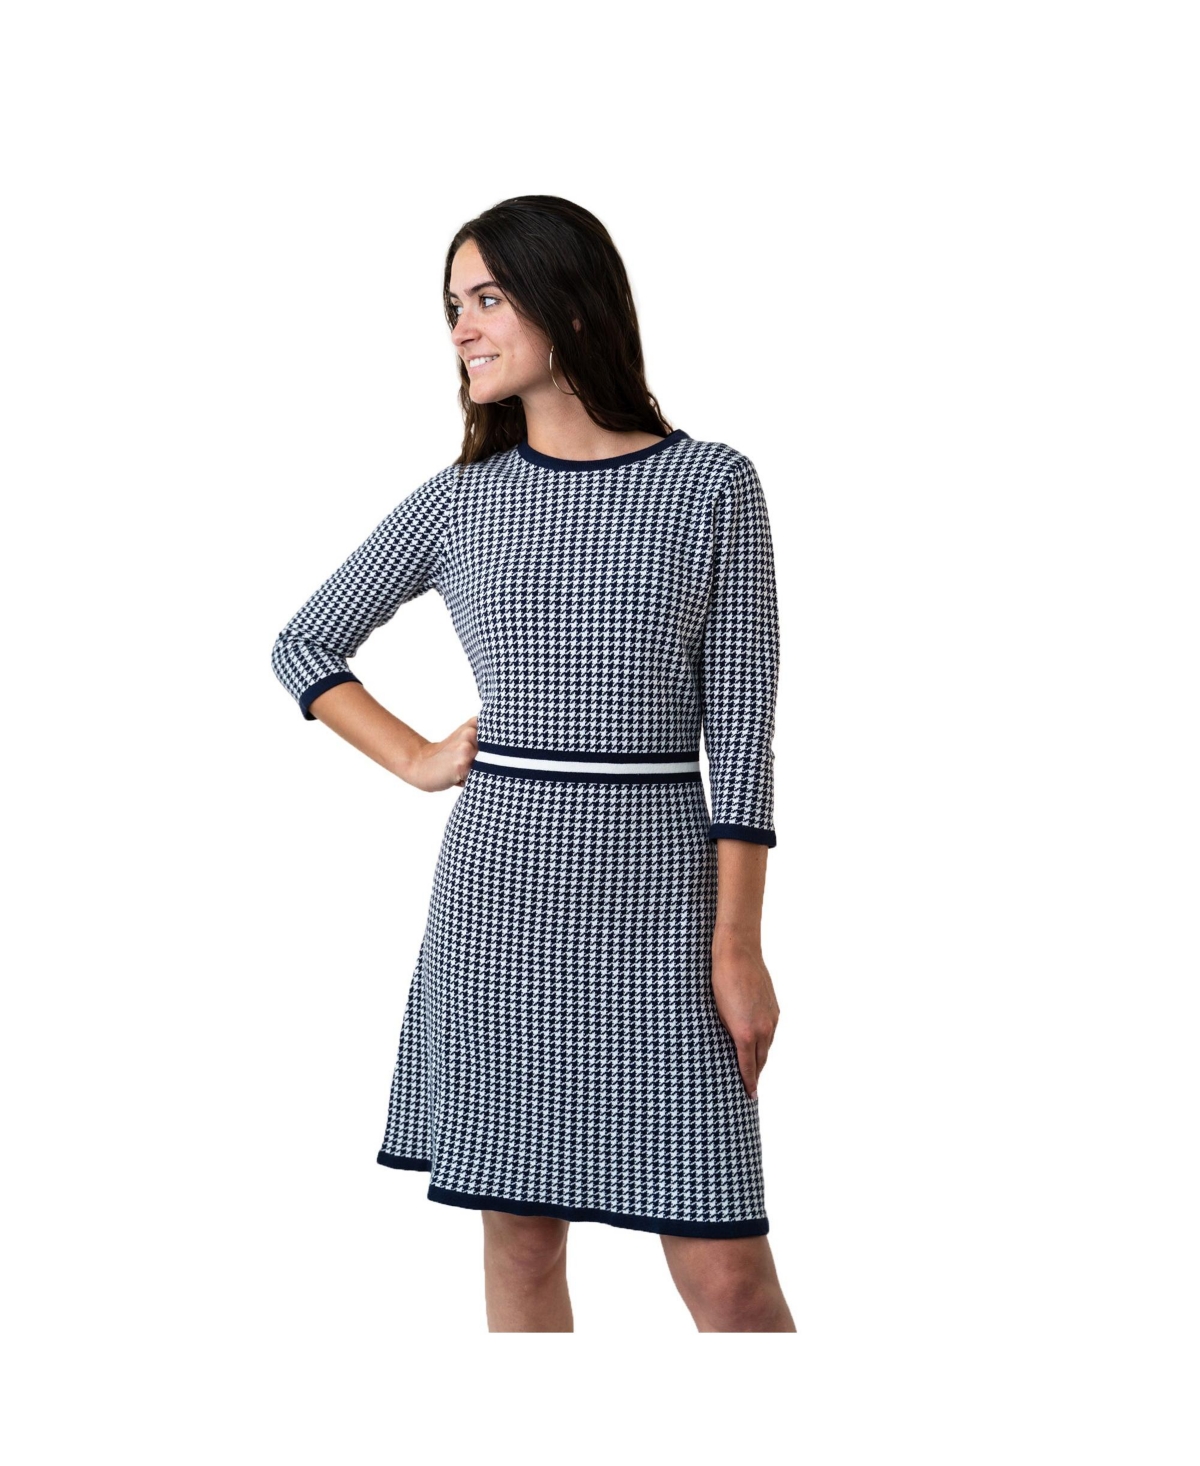 Womens' Organic Cotton 3/4 Sleeve Fit and Flare Sweater Dress - Blue